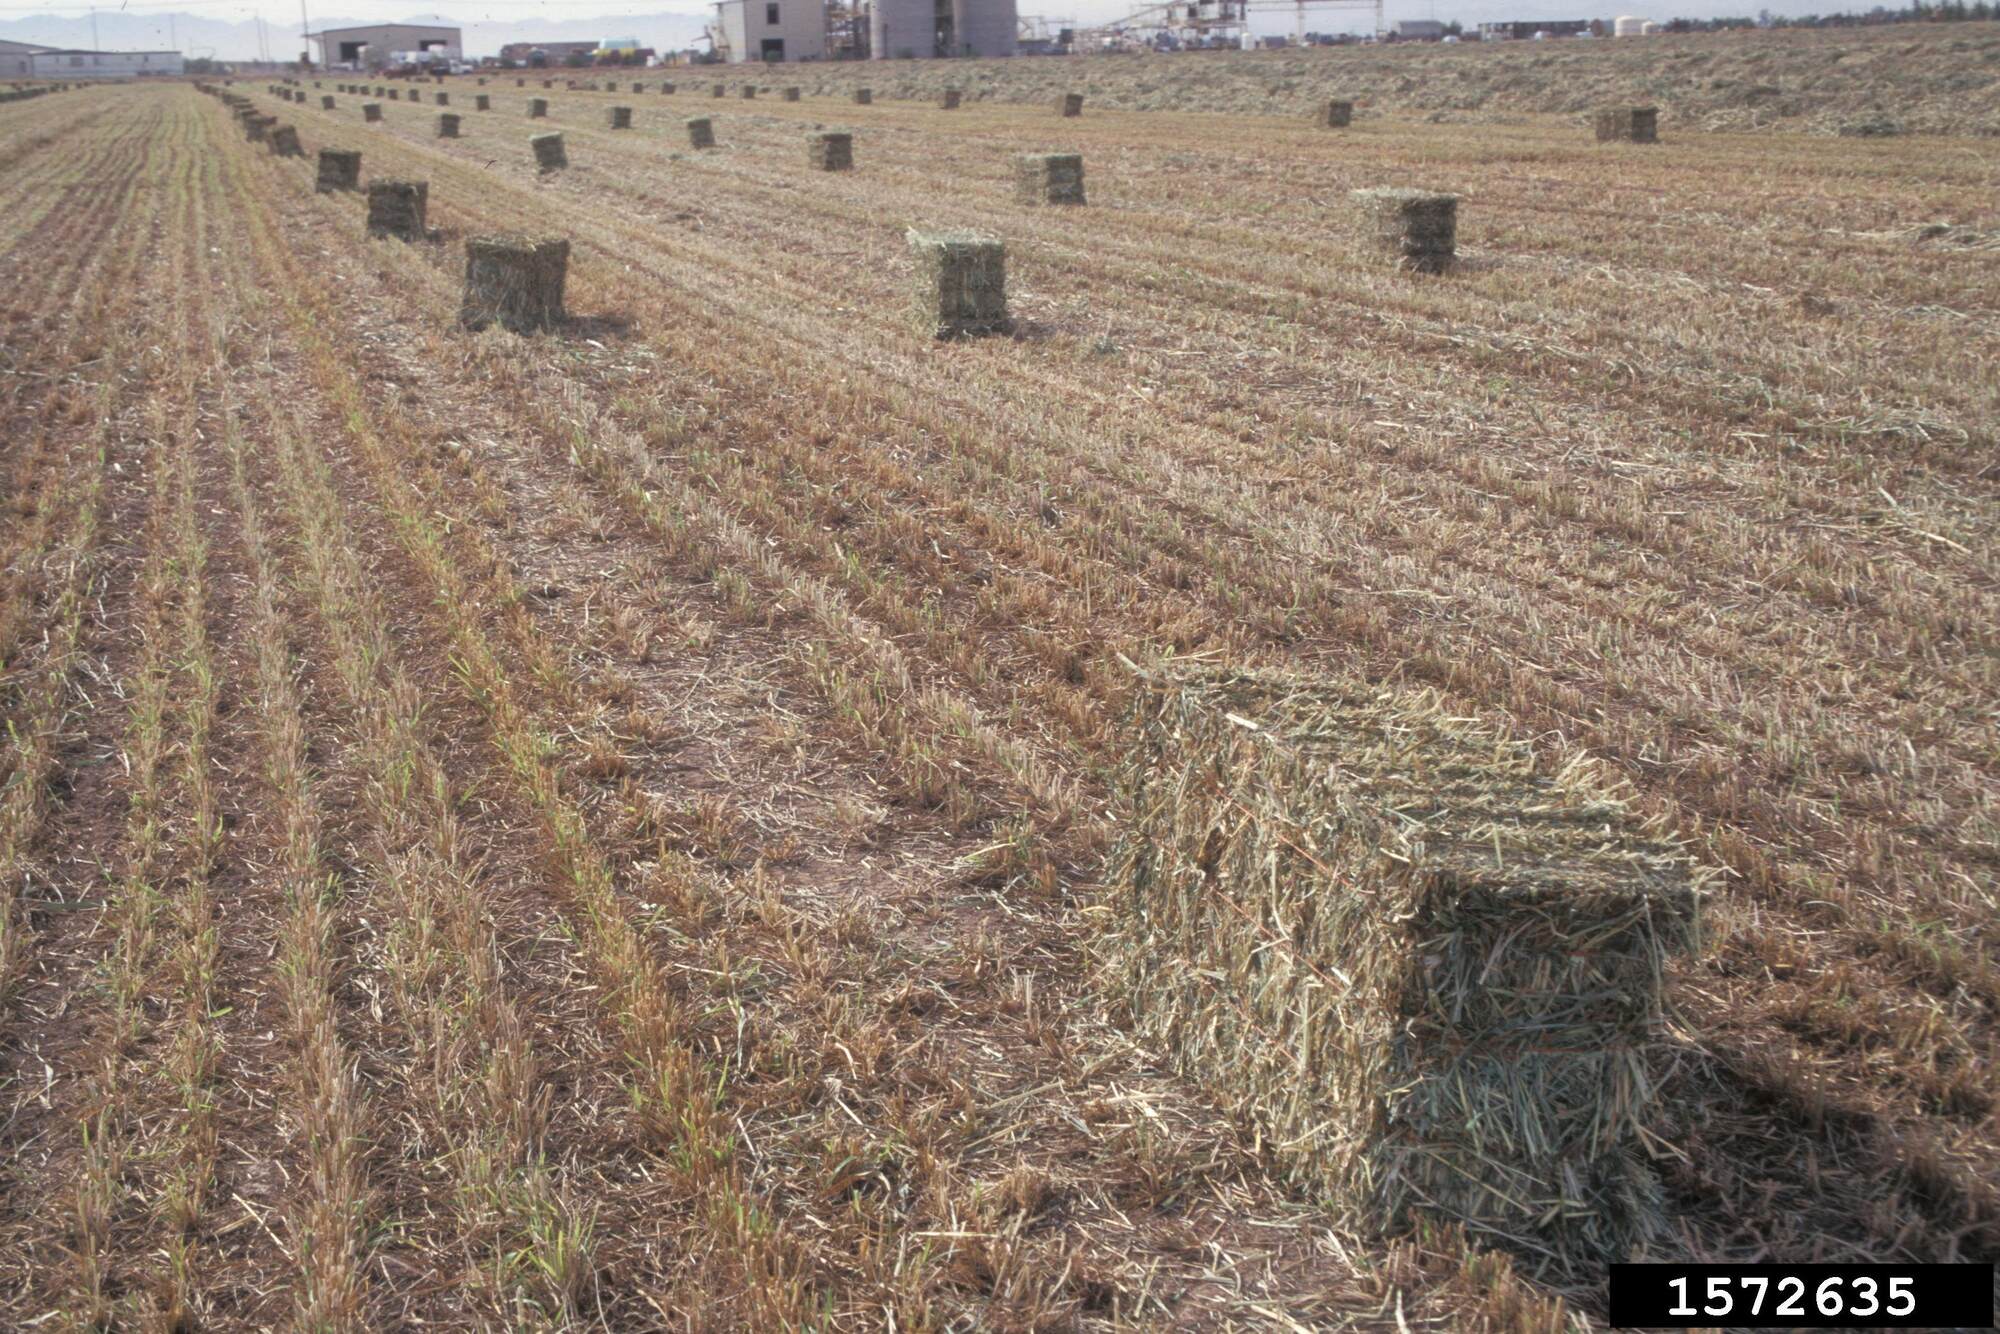 Photograph of dried sudangrass in a field that has been baled into rectangular bales of hay.